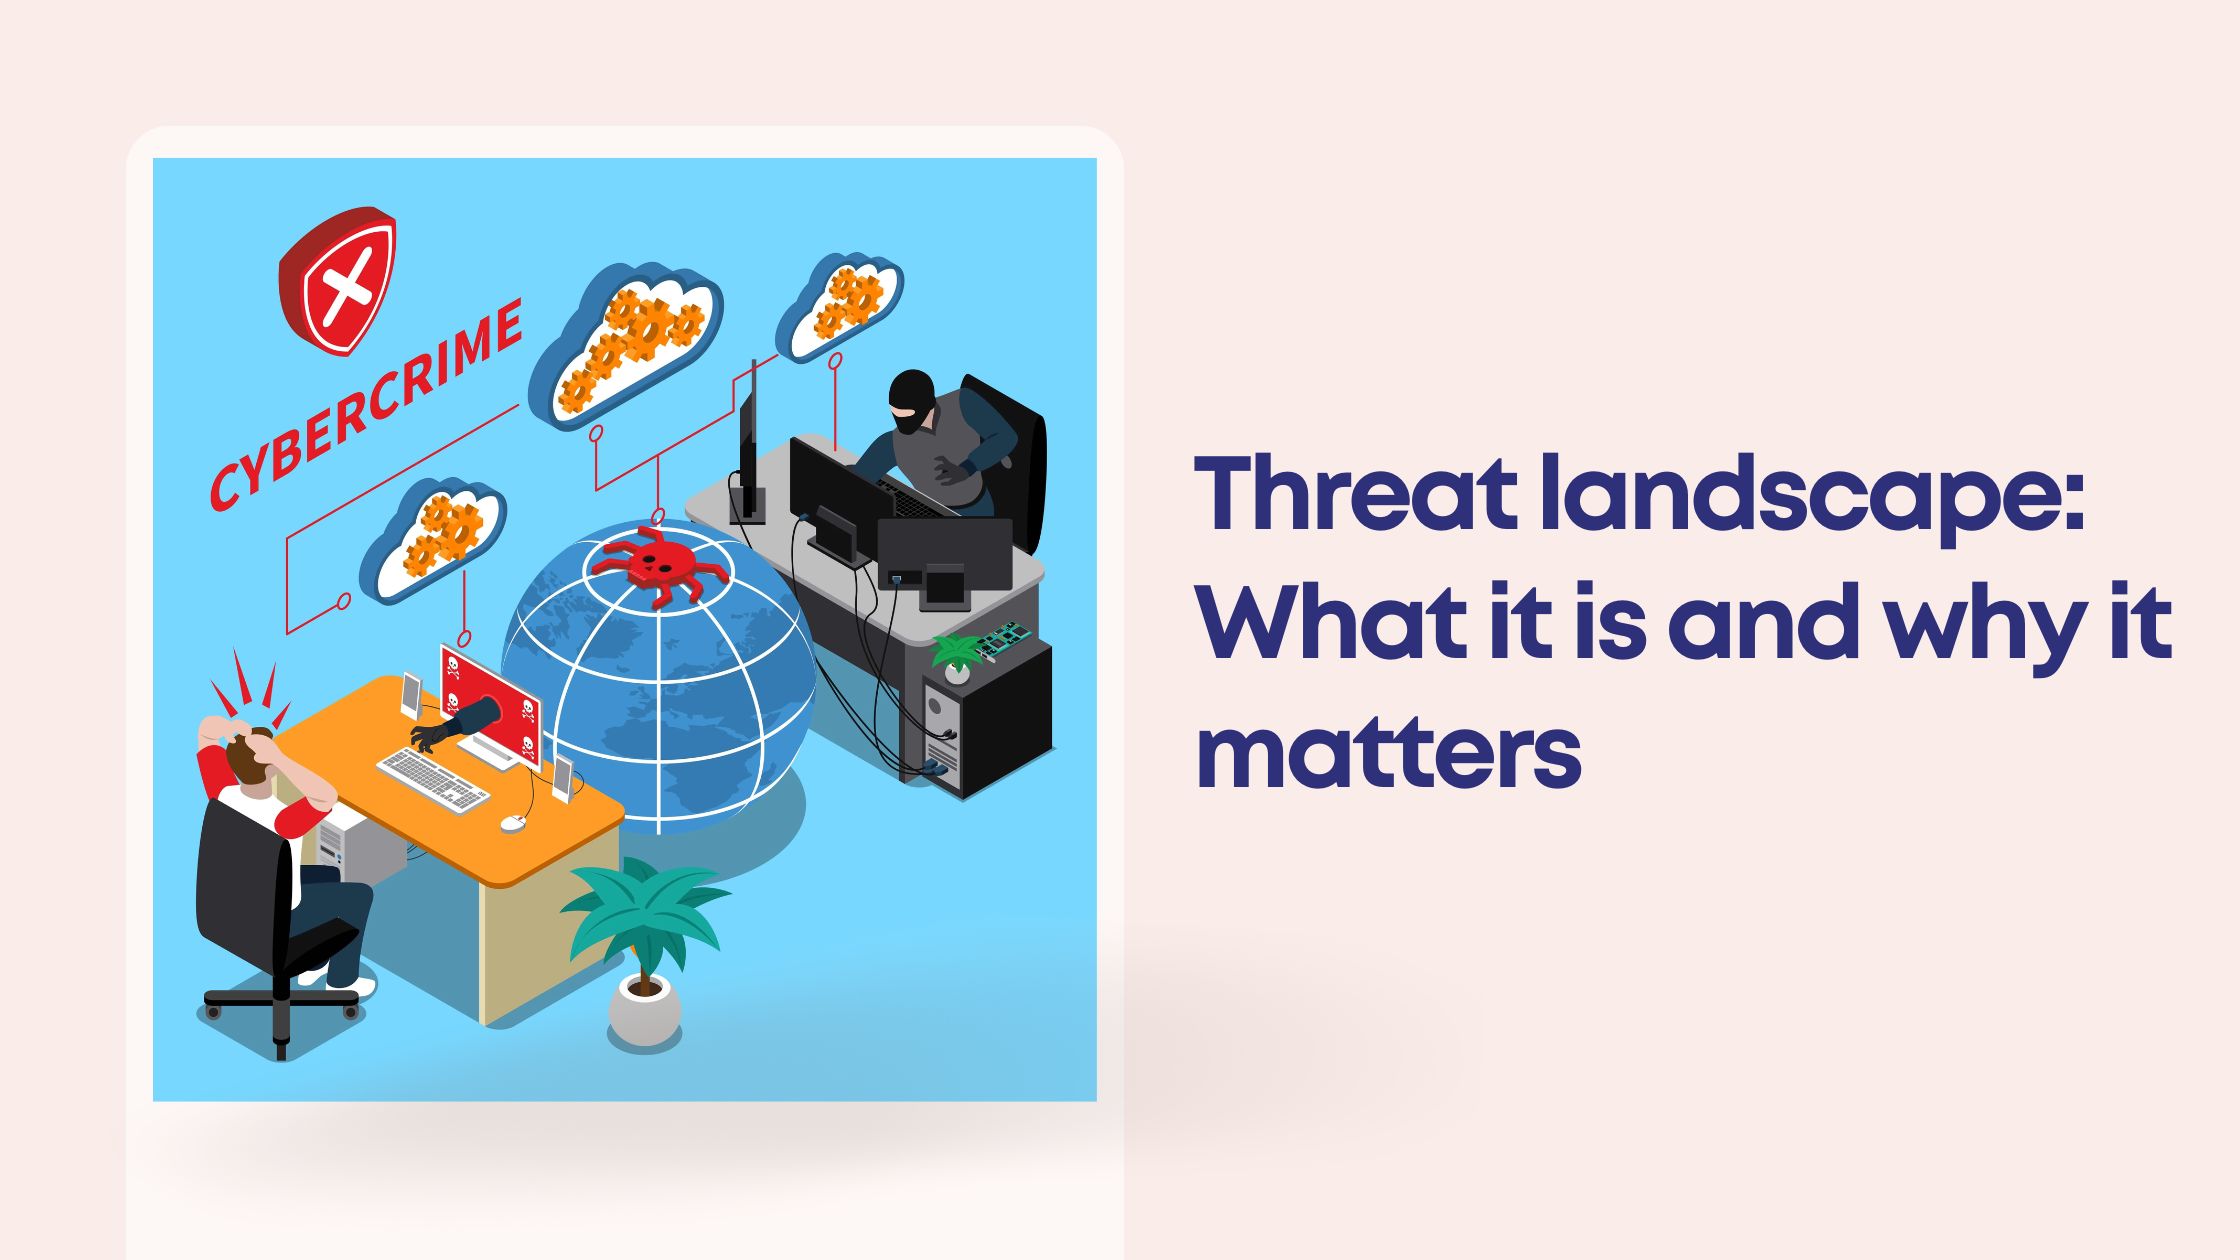 The Threat landscape: What it is and why it matters